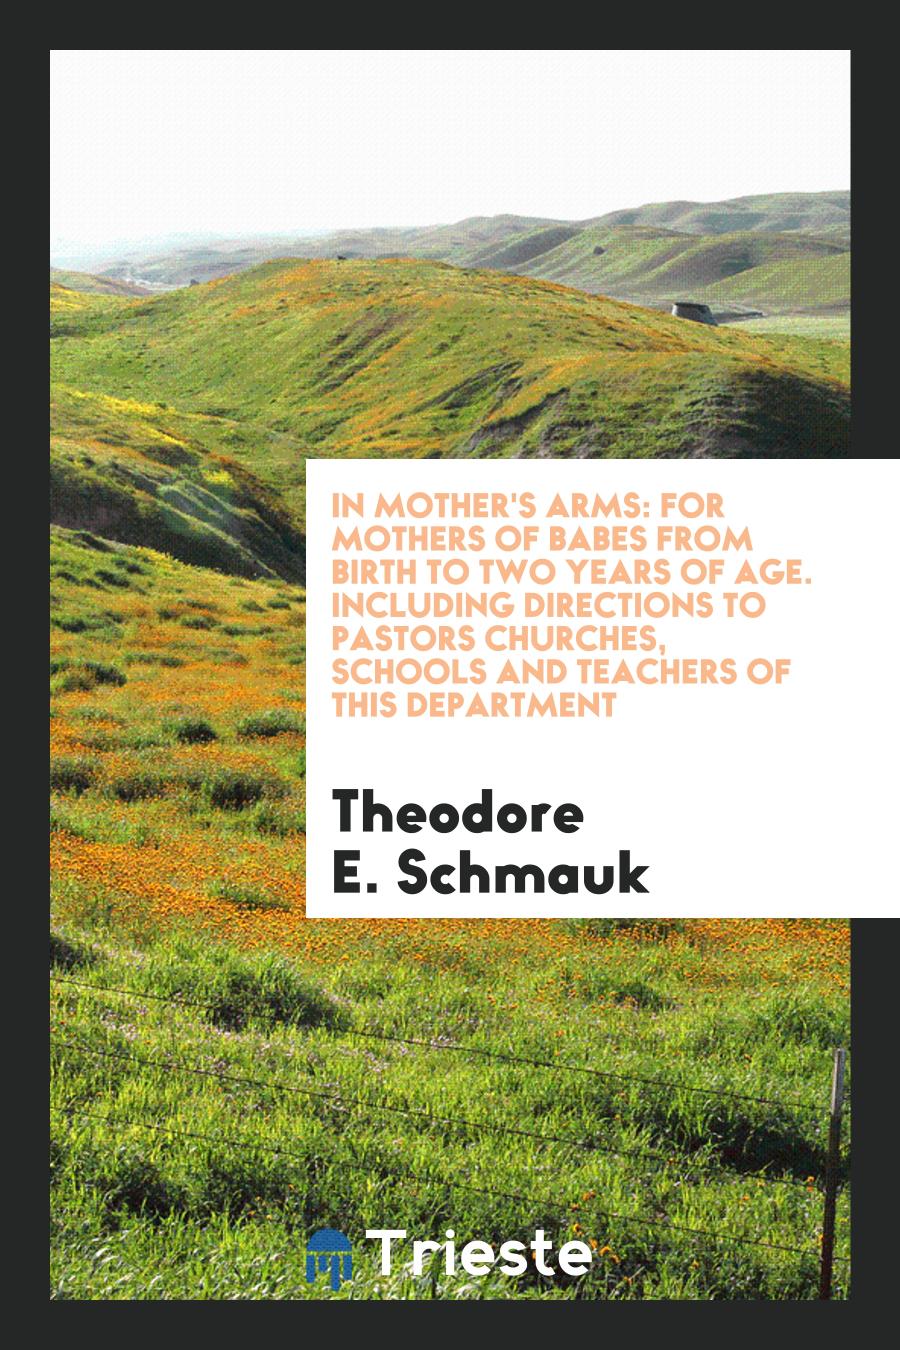 In Mother's Arms: For Mothers of Babes from Birth to Two Years of Age. Including Directions to Pastors Churches, Schools and Teachers of This Department